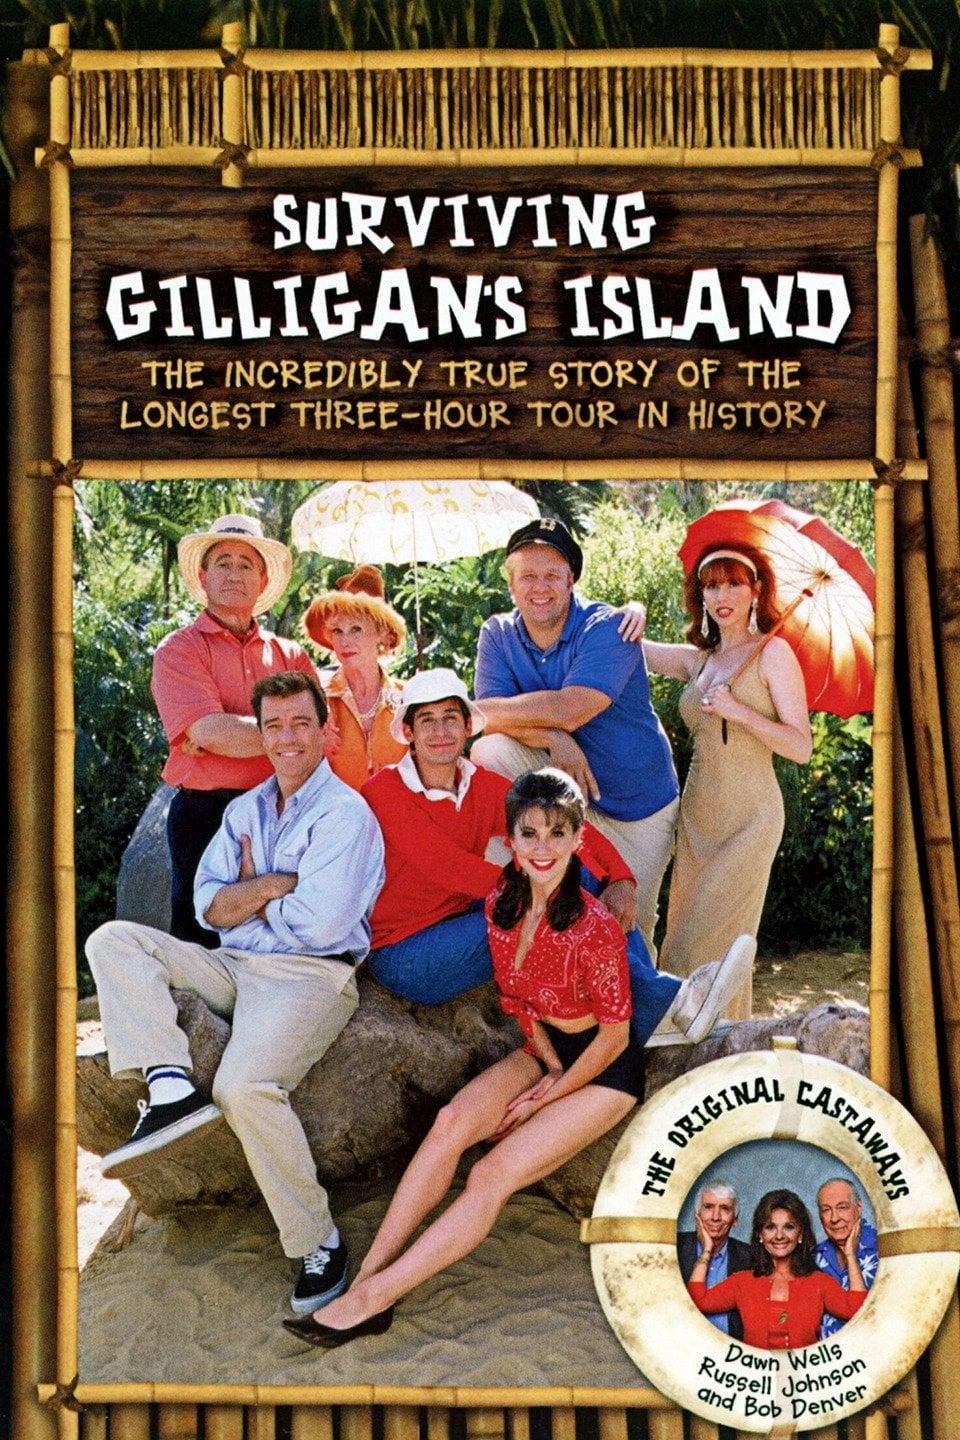 Surviving Gilligan's Island: The Incredibly True Story of the Longest Three-Hour Tour in History poster